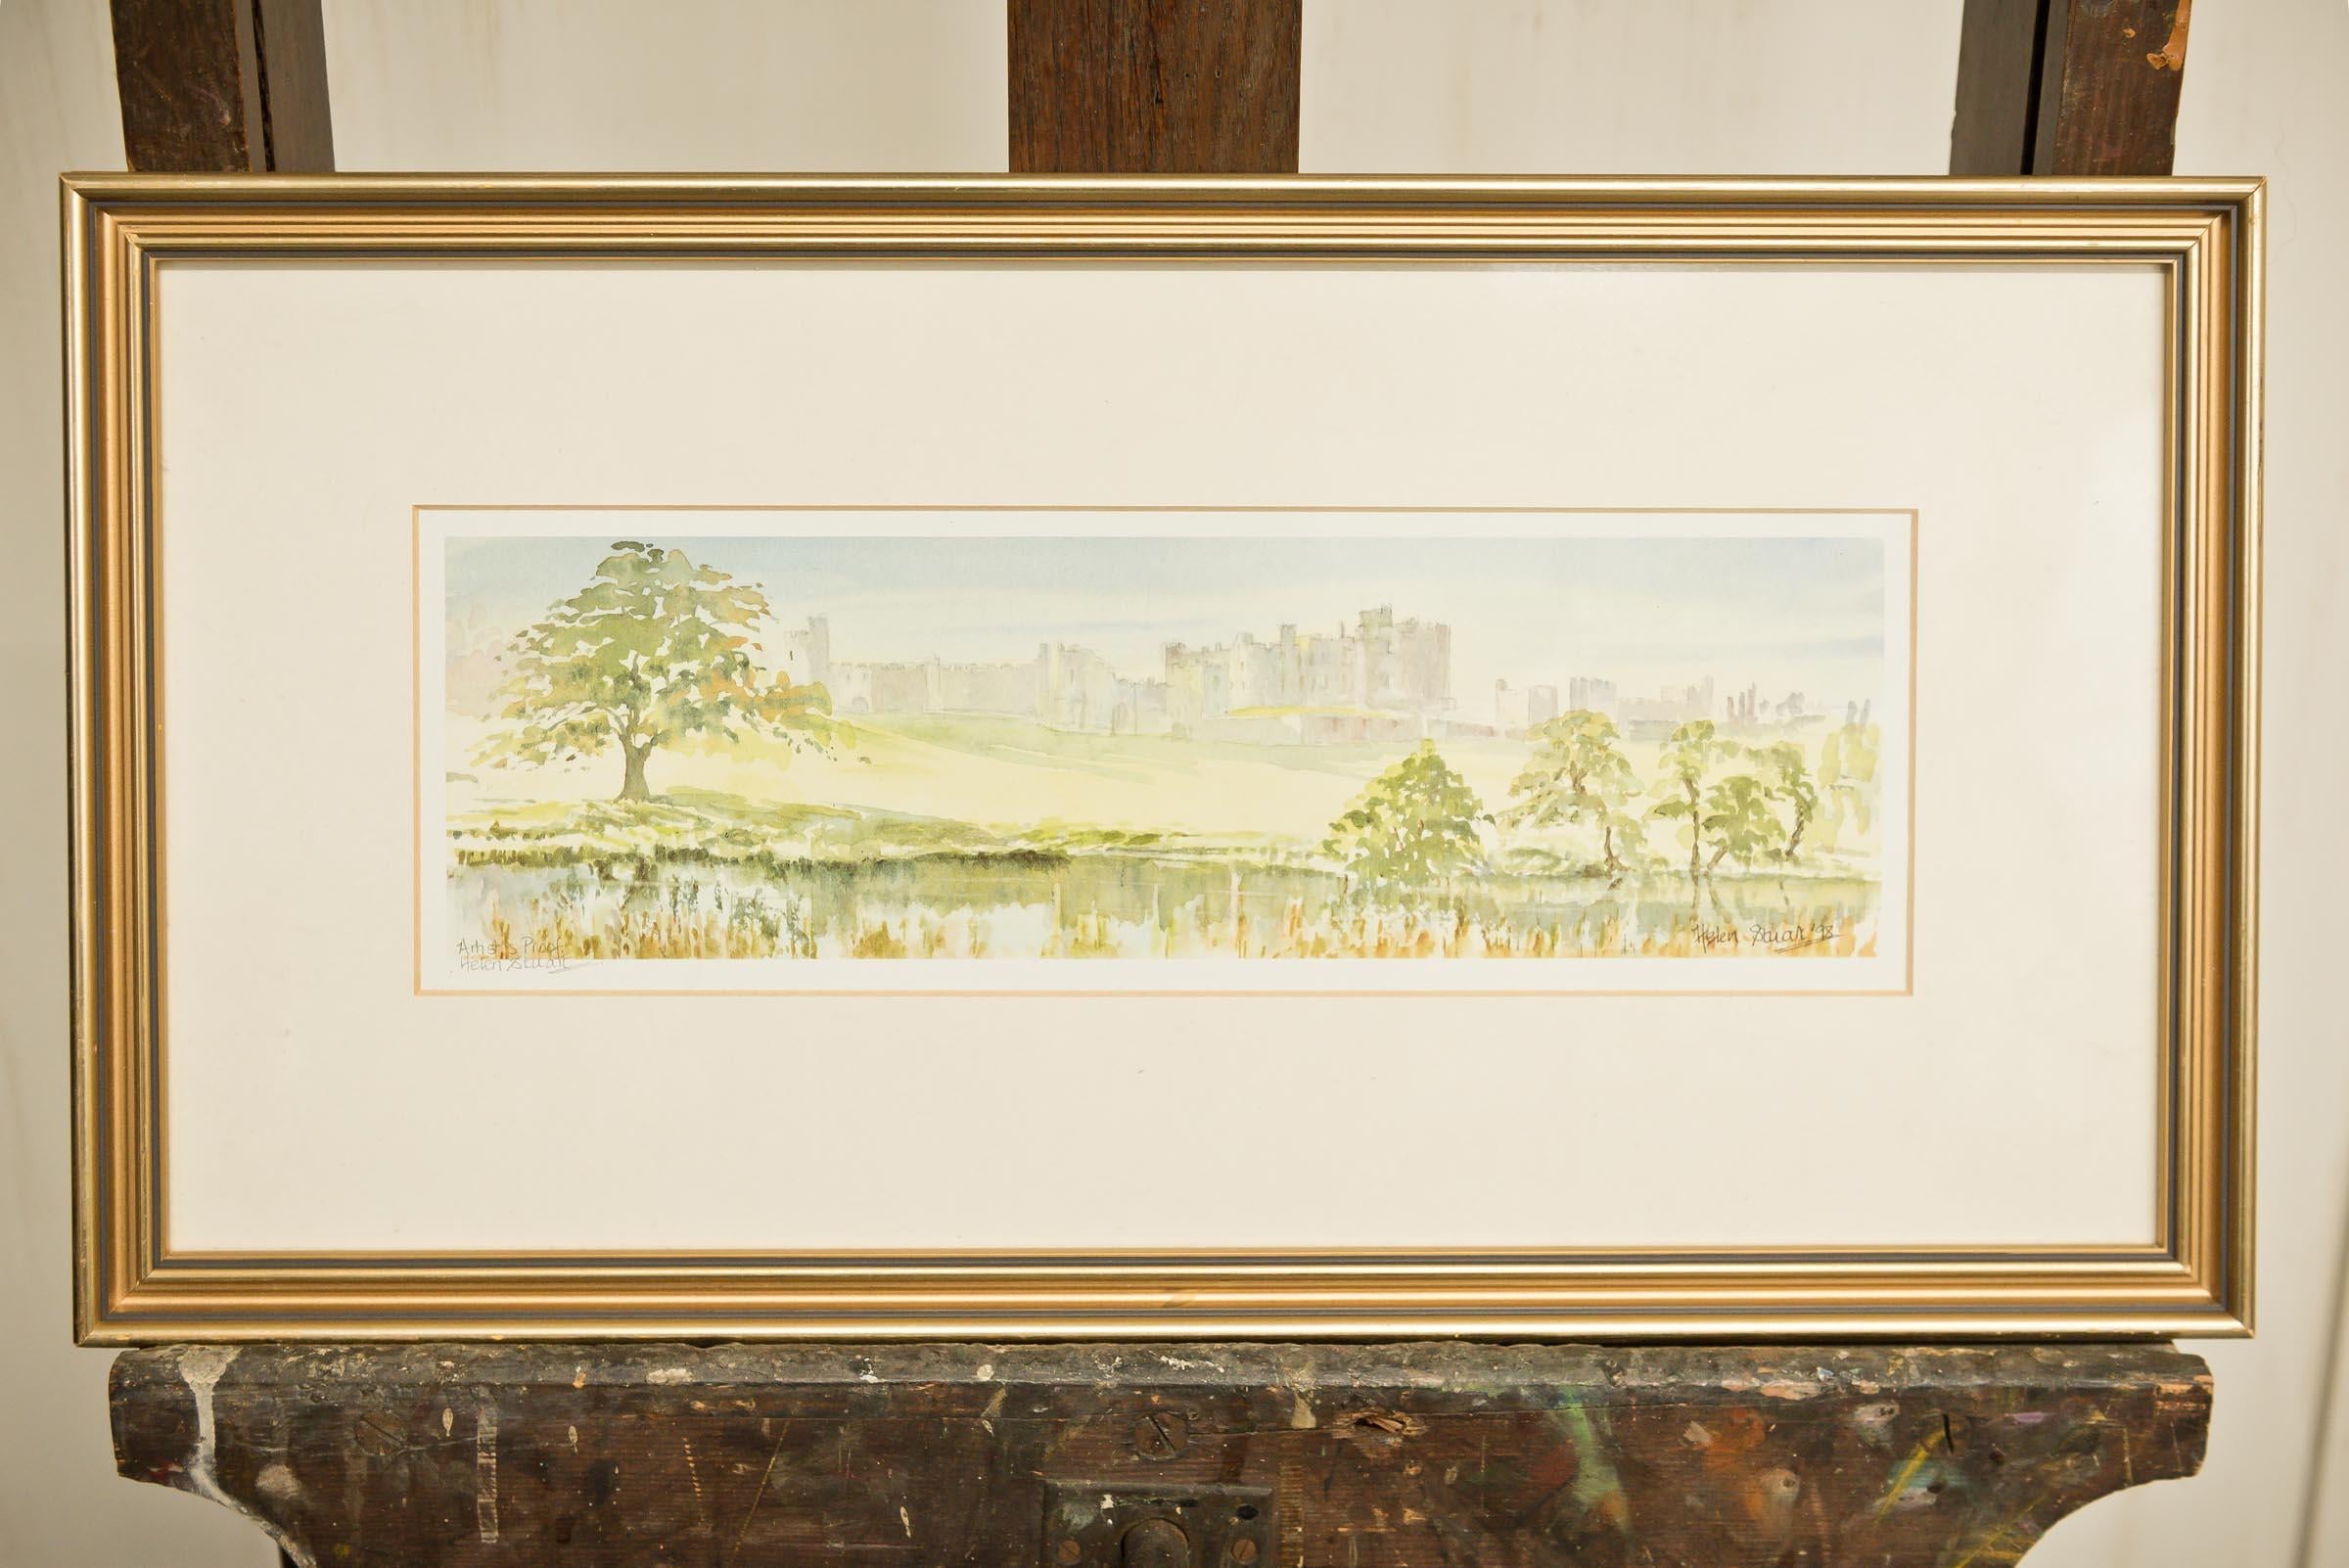 Helen Stuart is a water colour artist who specialises in Northumberland scenes. This signed Artist's Proof of Alnwick Castle is framed and would effortlessly fit in most any space. The soft colours, trees and water gently lead to the hazy castle. A